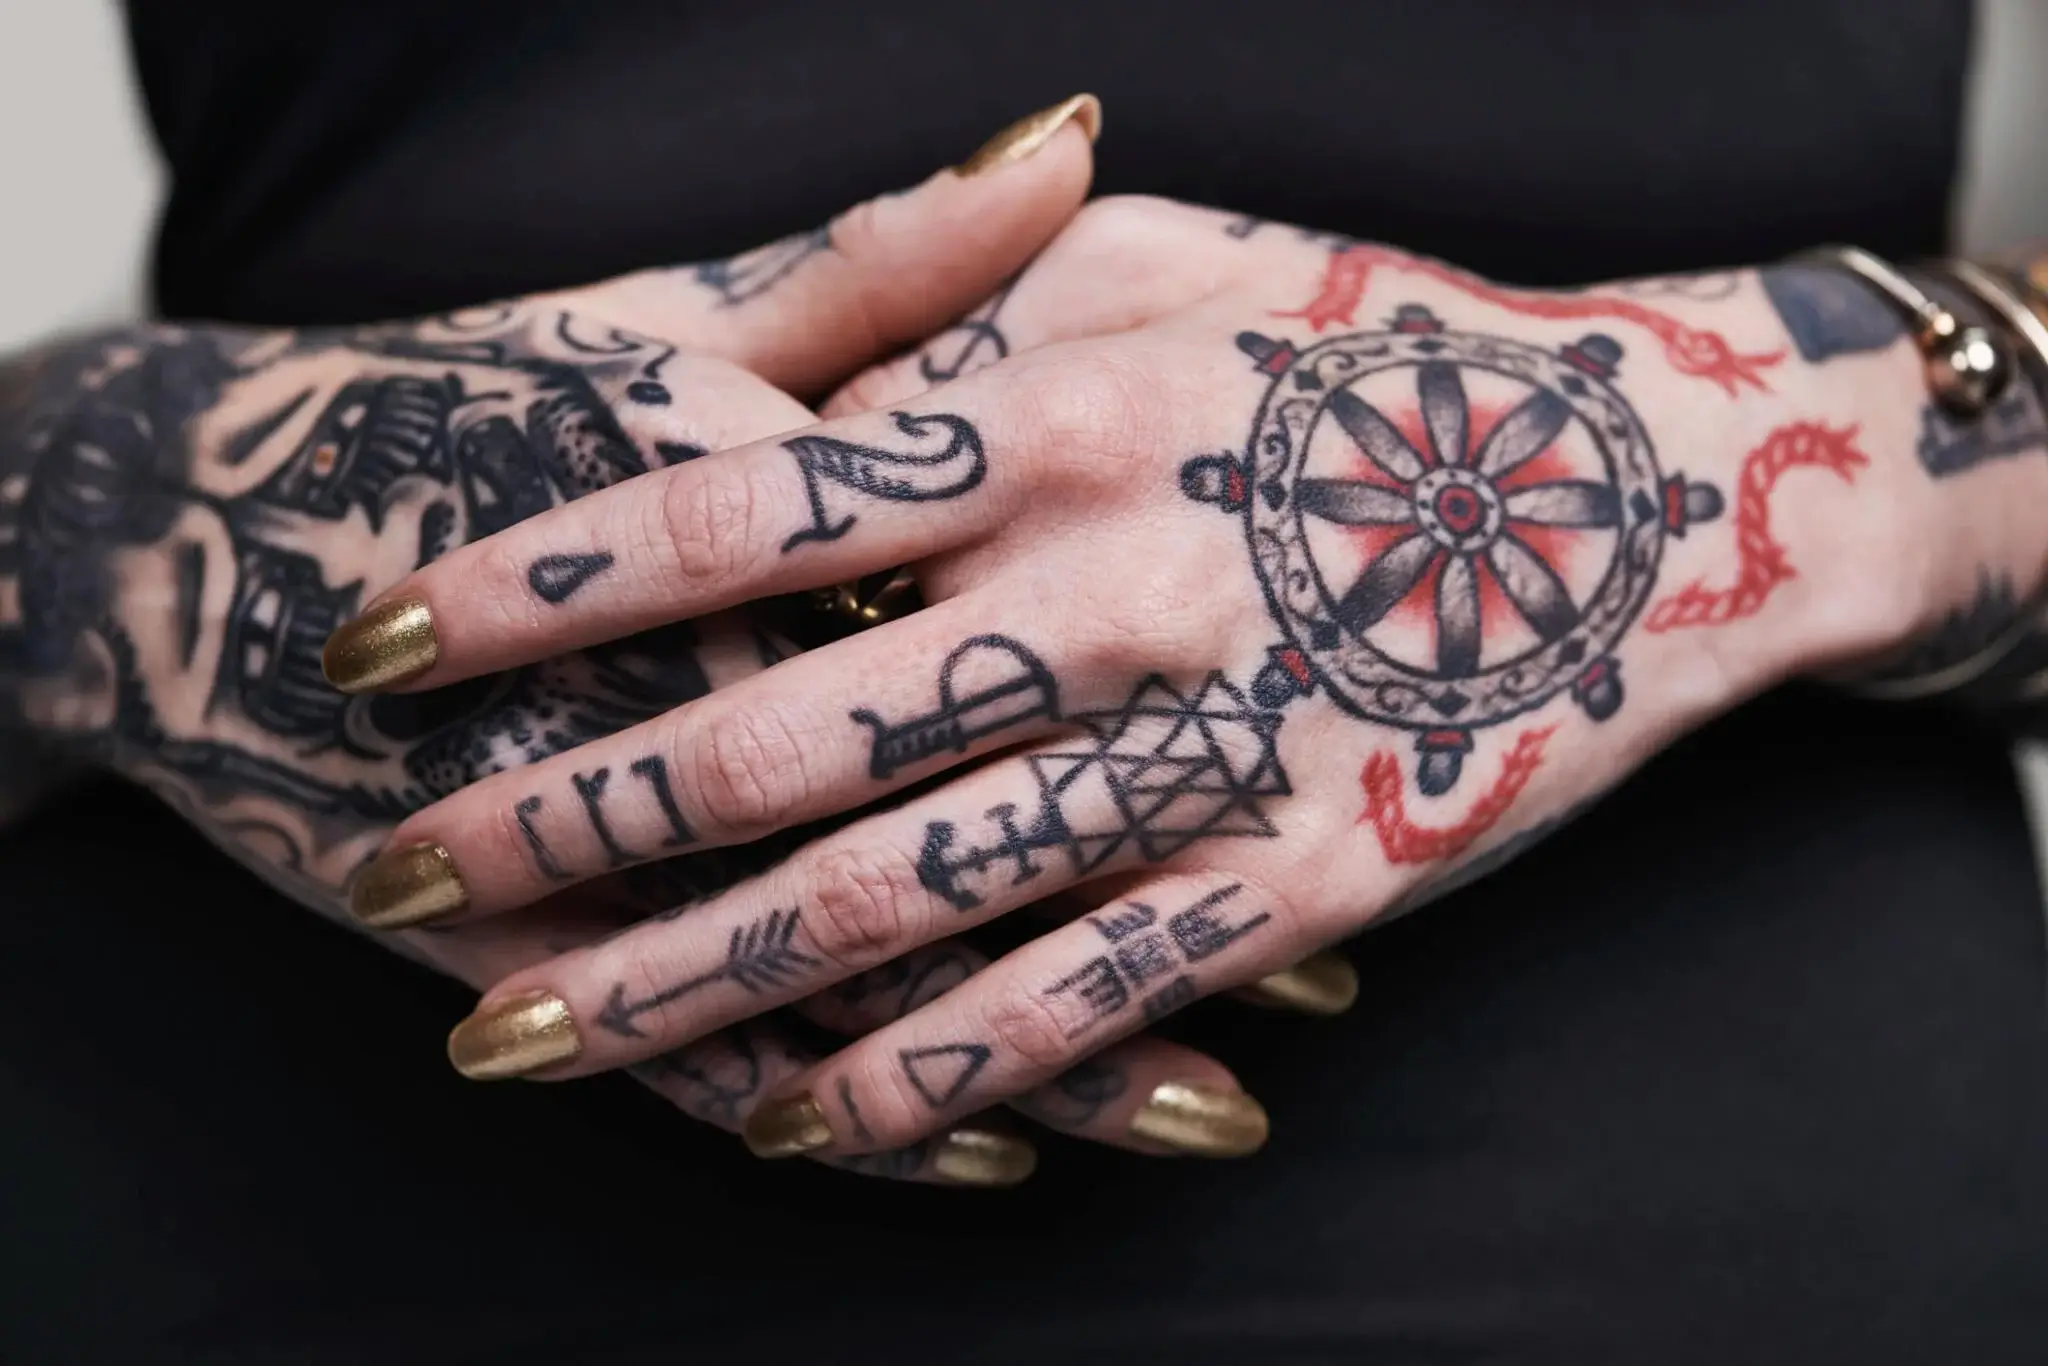 How Long Does A Finger Tattoo Take To Heal